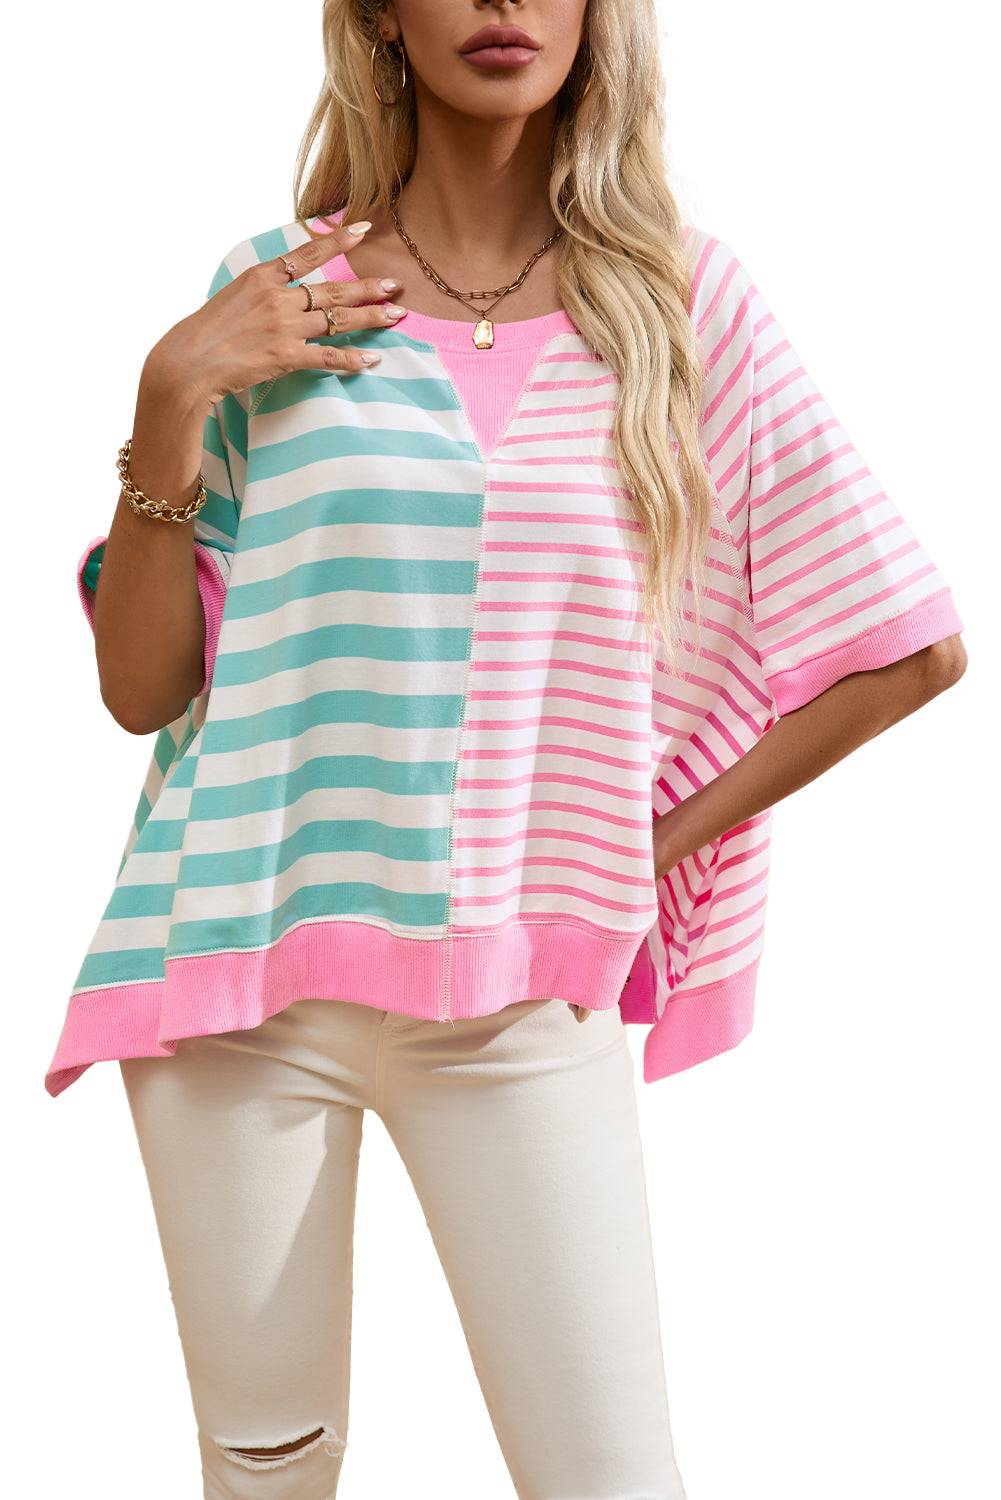 a woman wearing a pink and green striped top